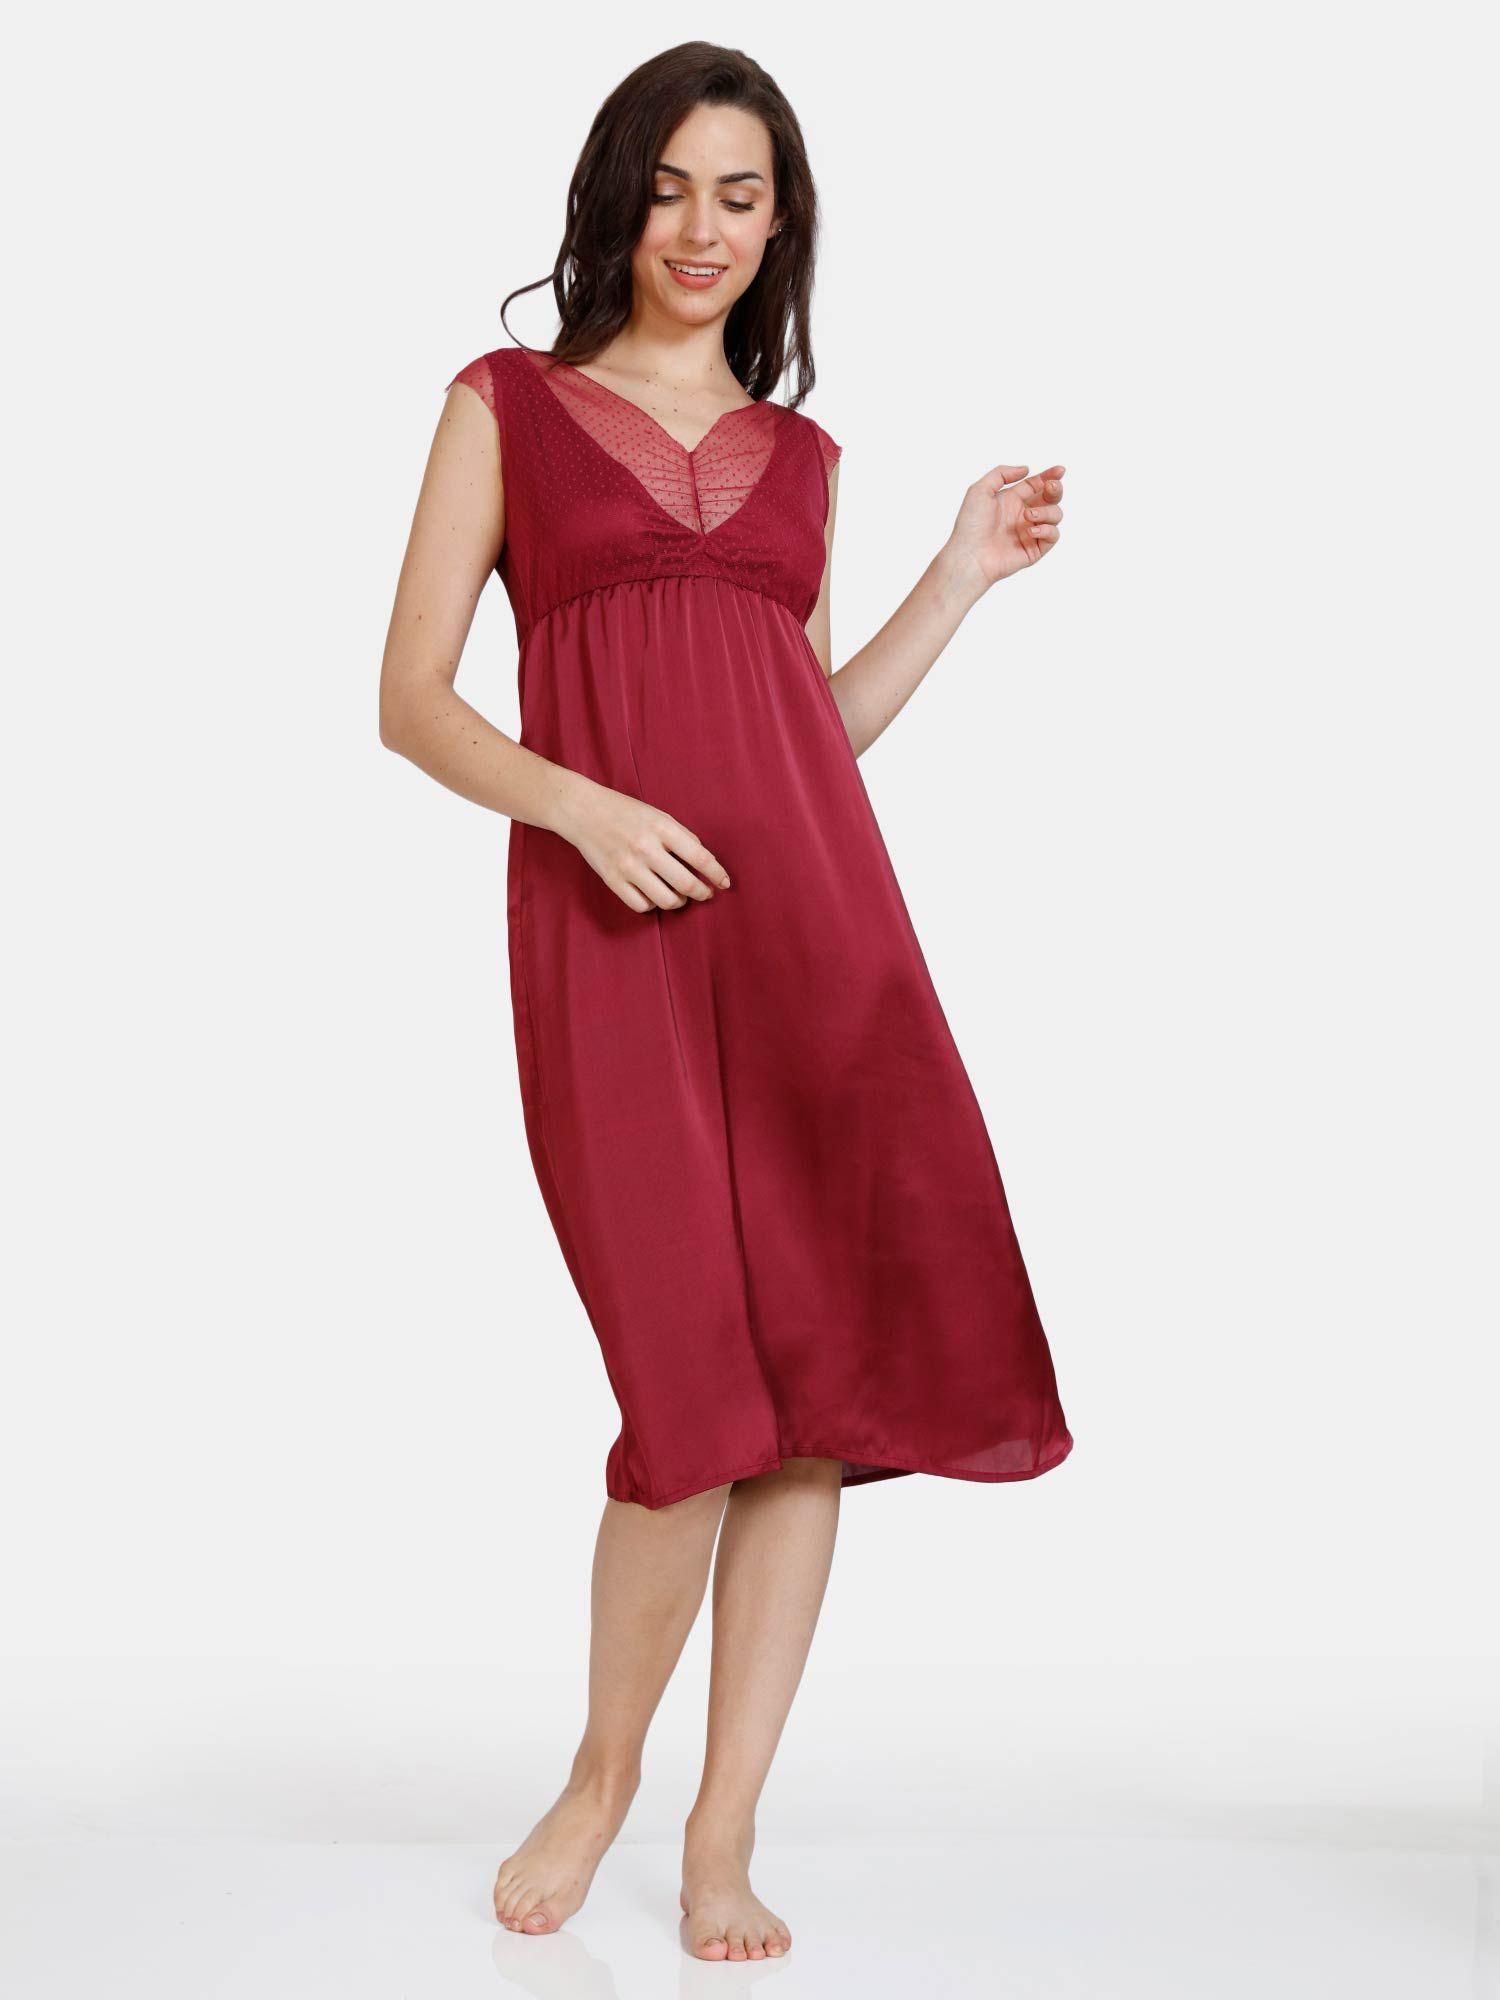 paradise-garden-woven-mid-length-nightdress-red